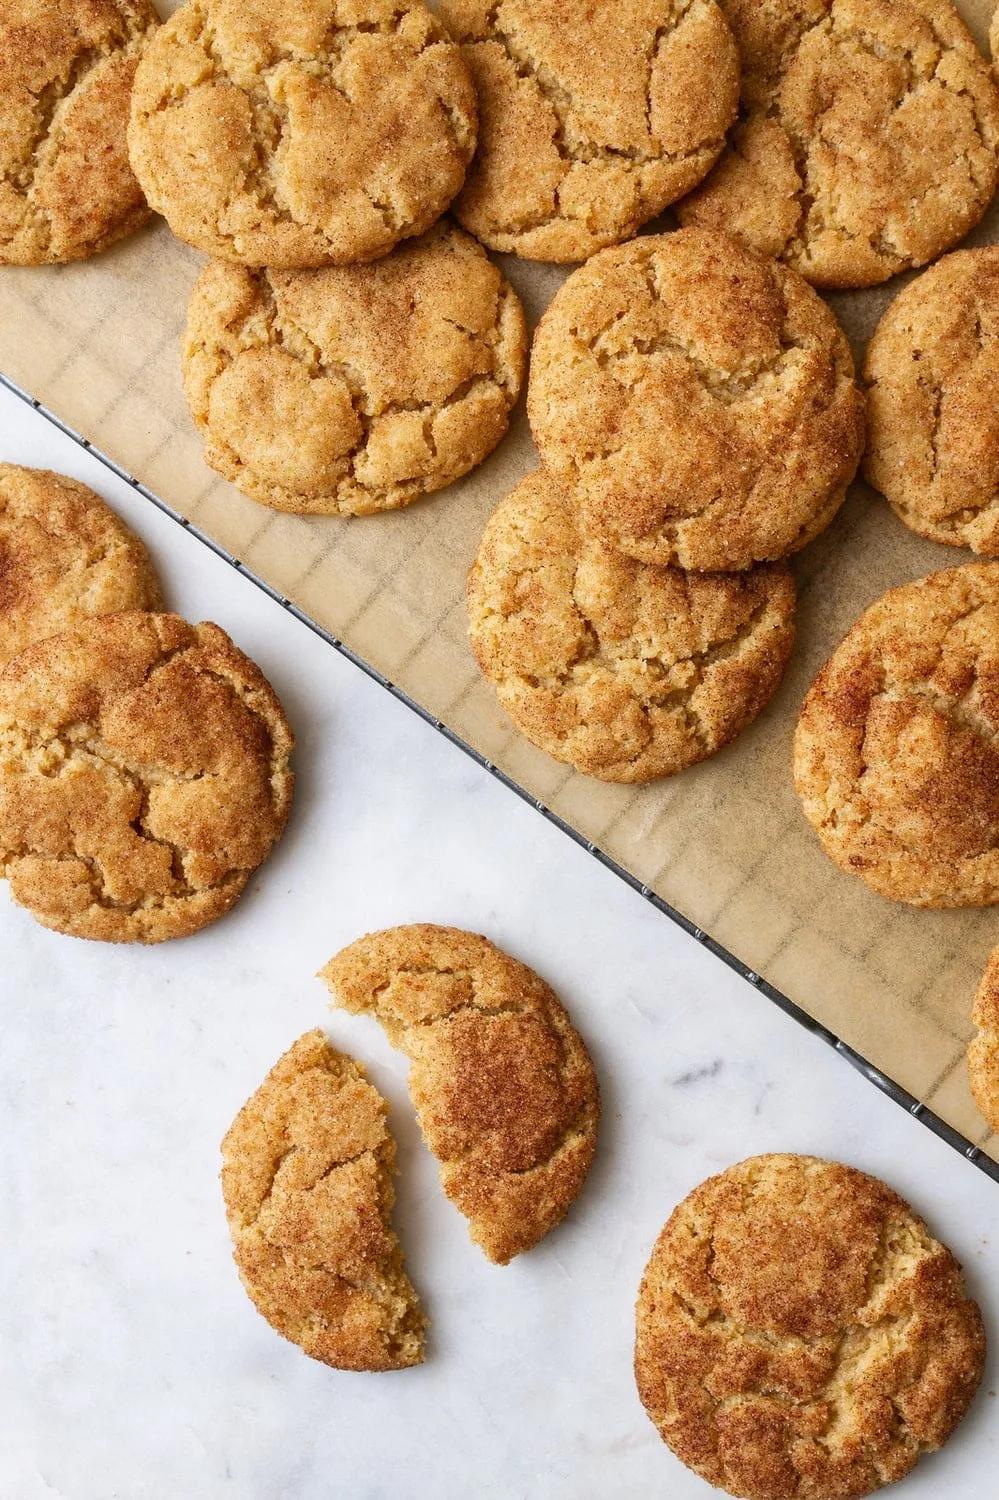 Best Snickerdoodles : Soft and Chewy Snickerdoodles - HouseKeeperMag ...